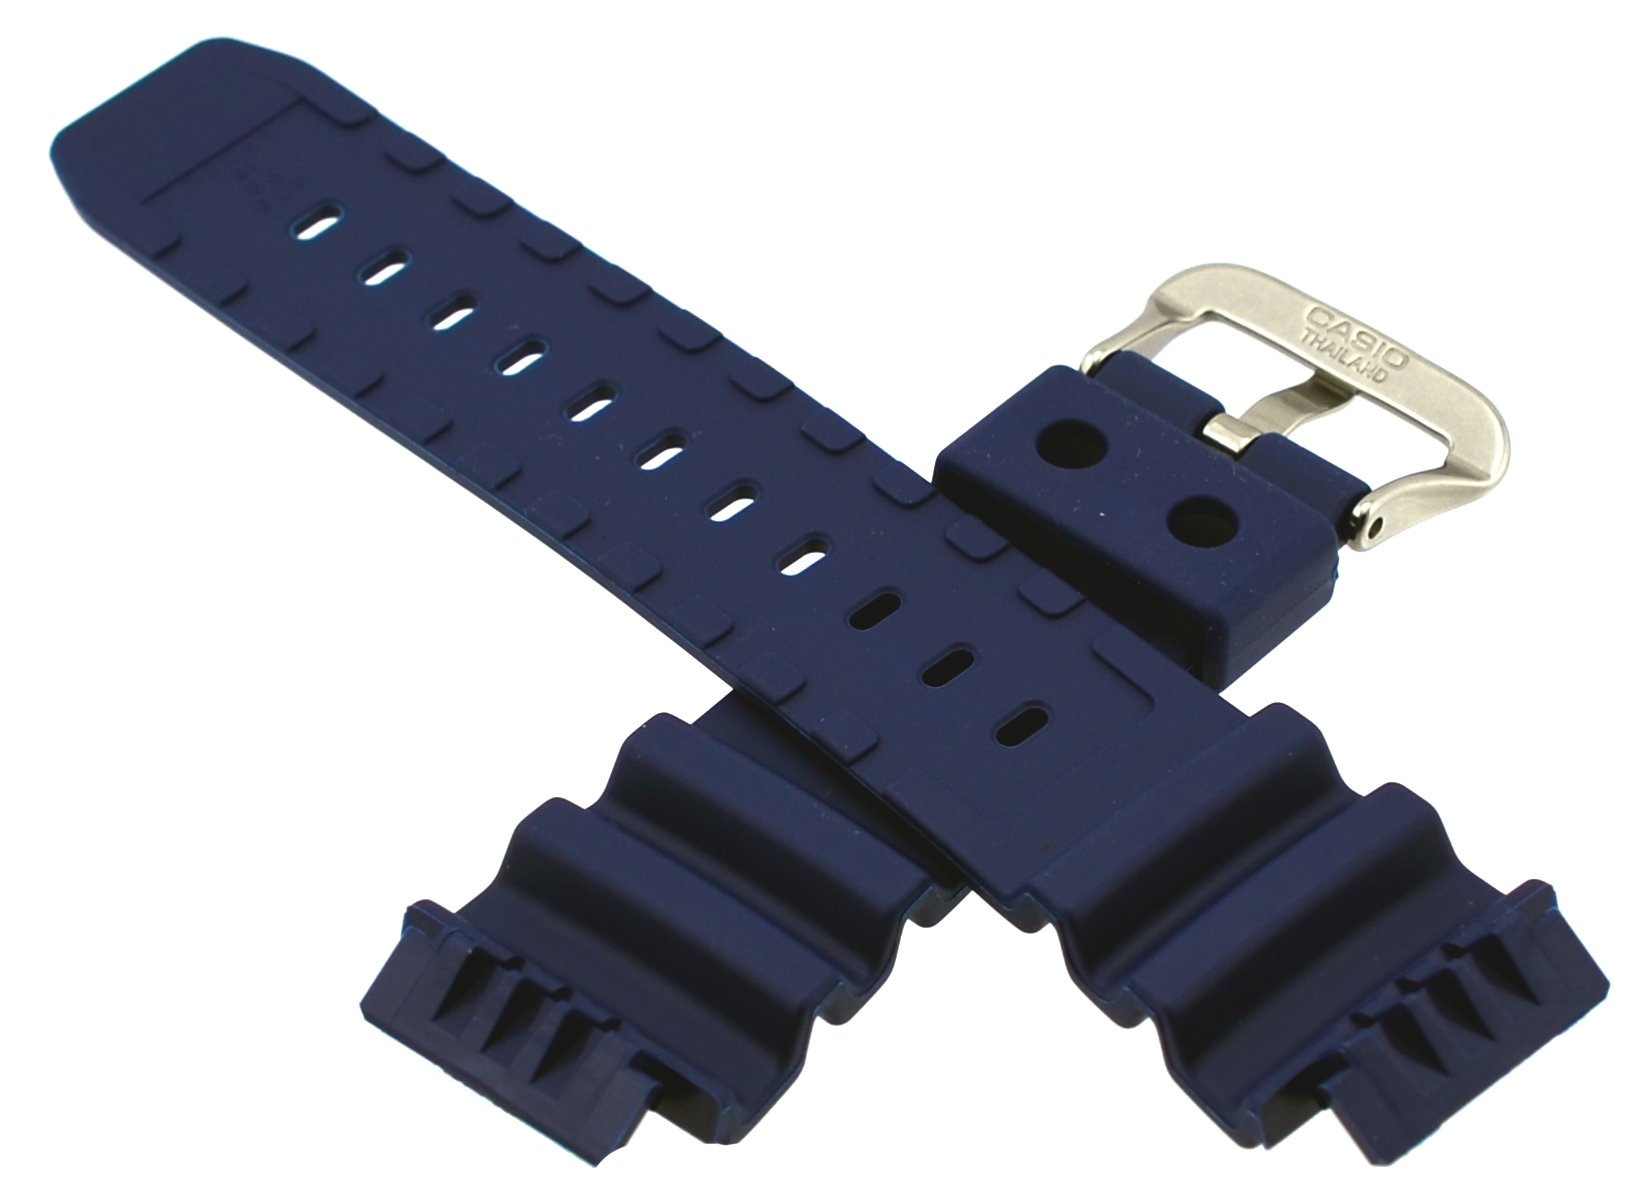 Casio Genuine Replacement Blue Strap for G Shock Watch Model # G-9100-2